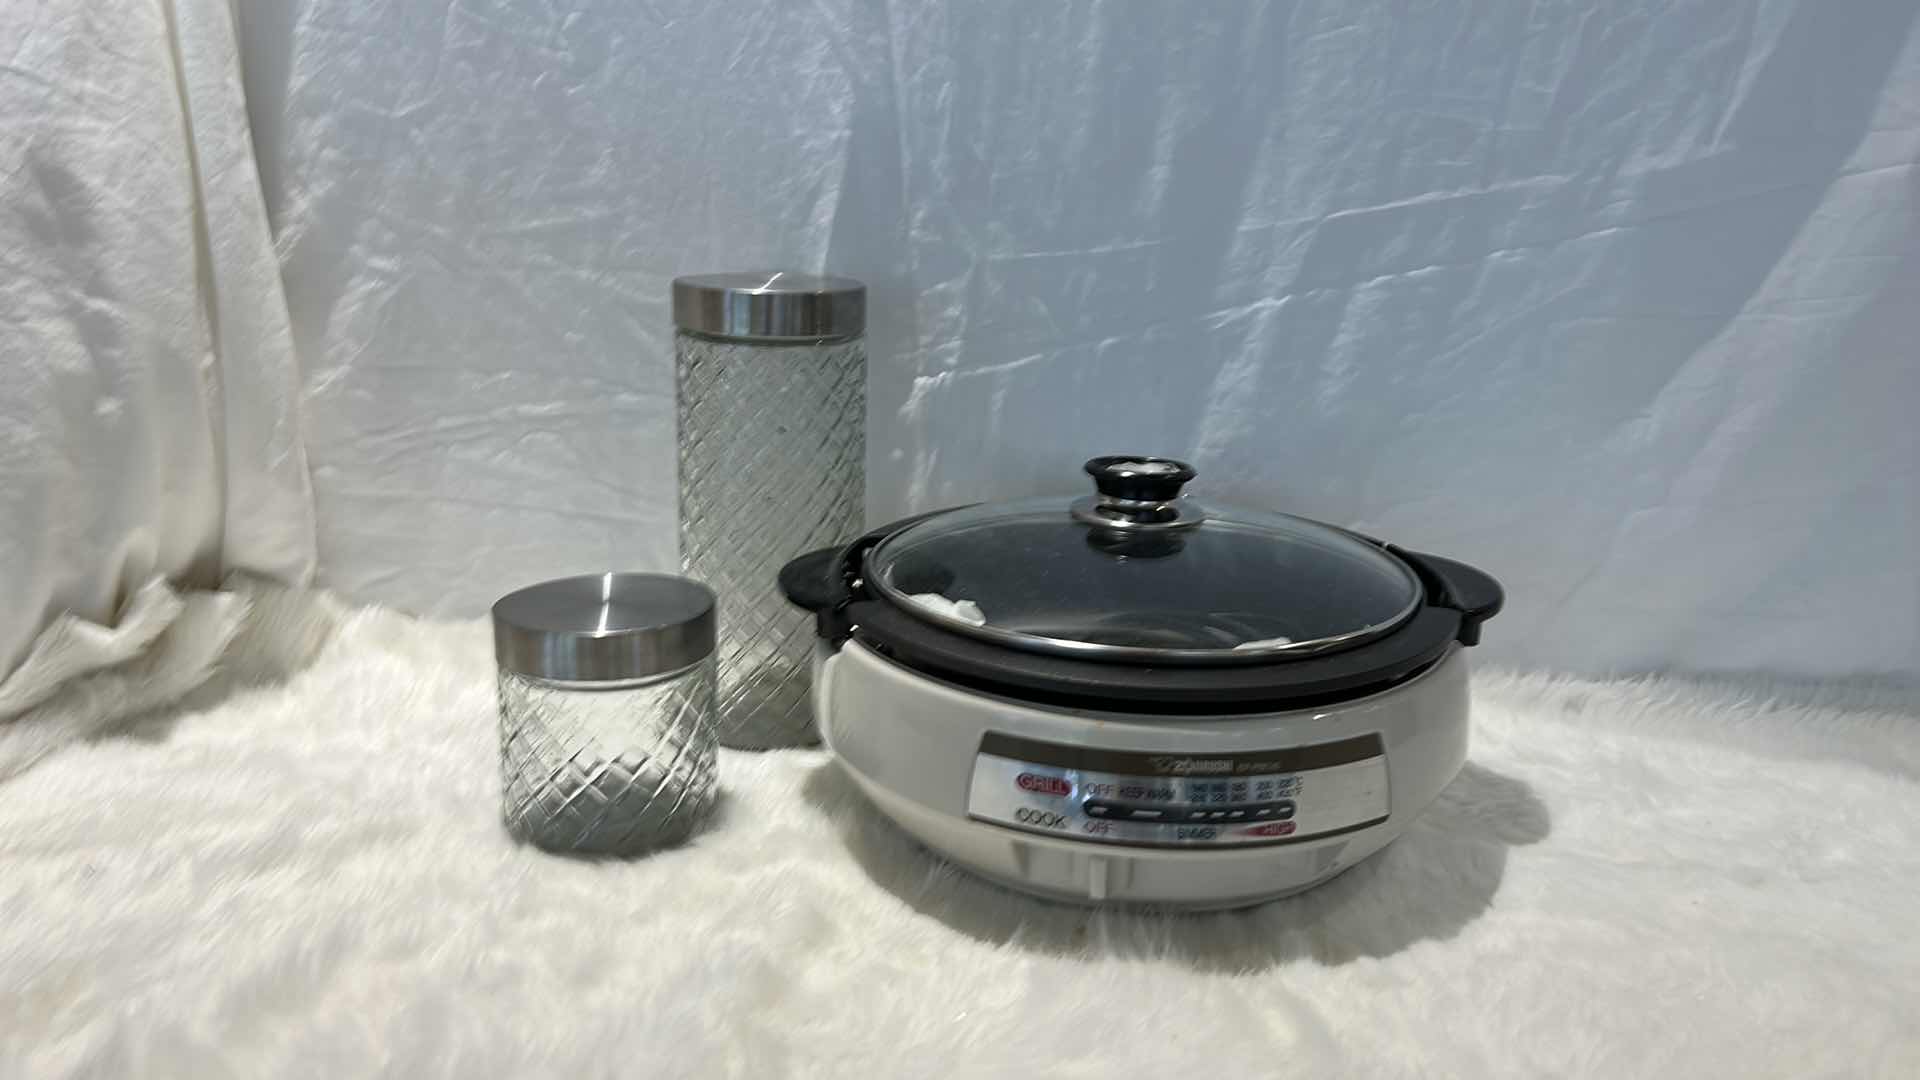 Photo 7 of KITCHEN ACCESSORIES - 2 GLASS CANISTERS AND ZOJIRUSHI GRILL